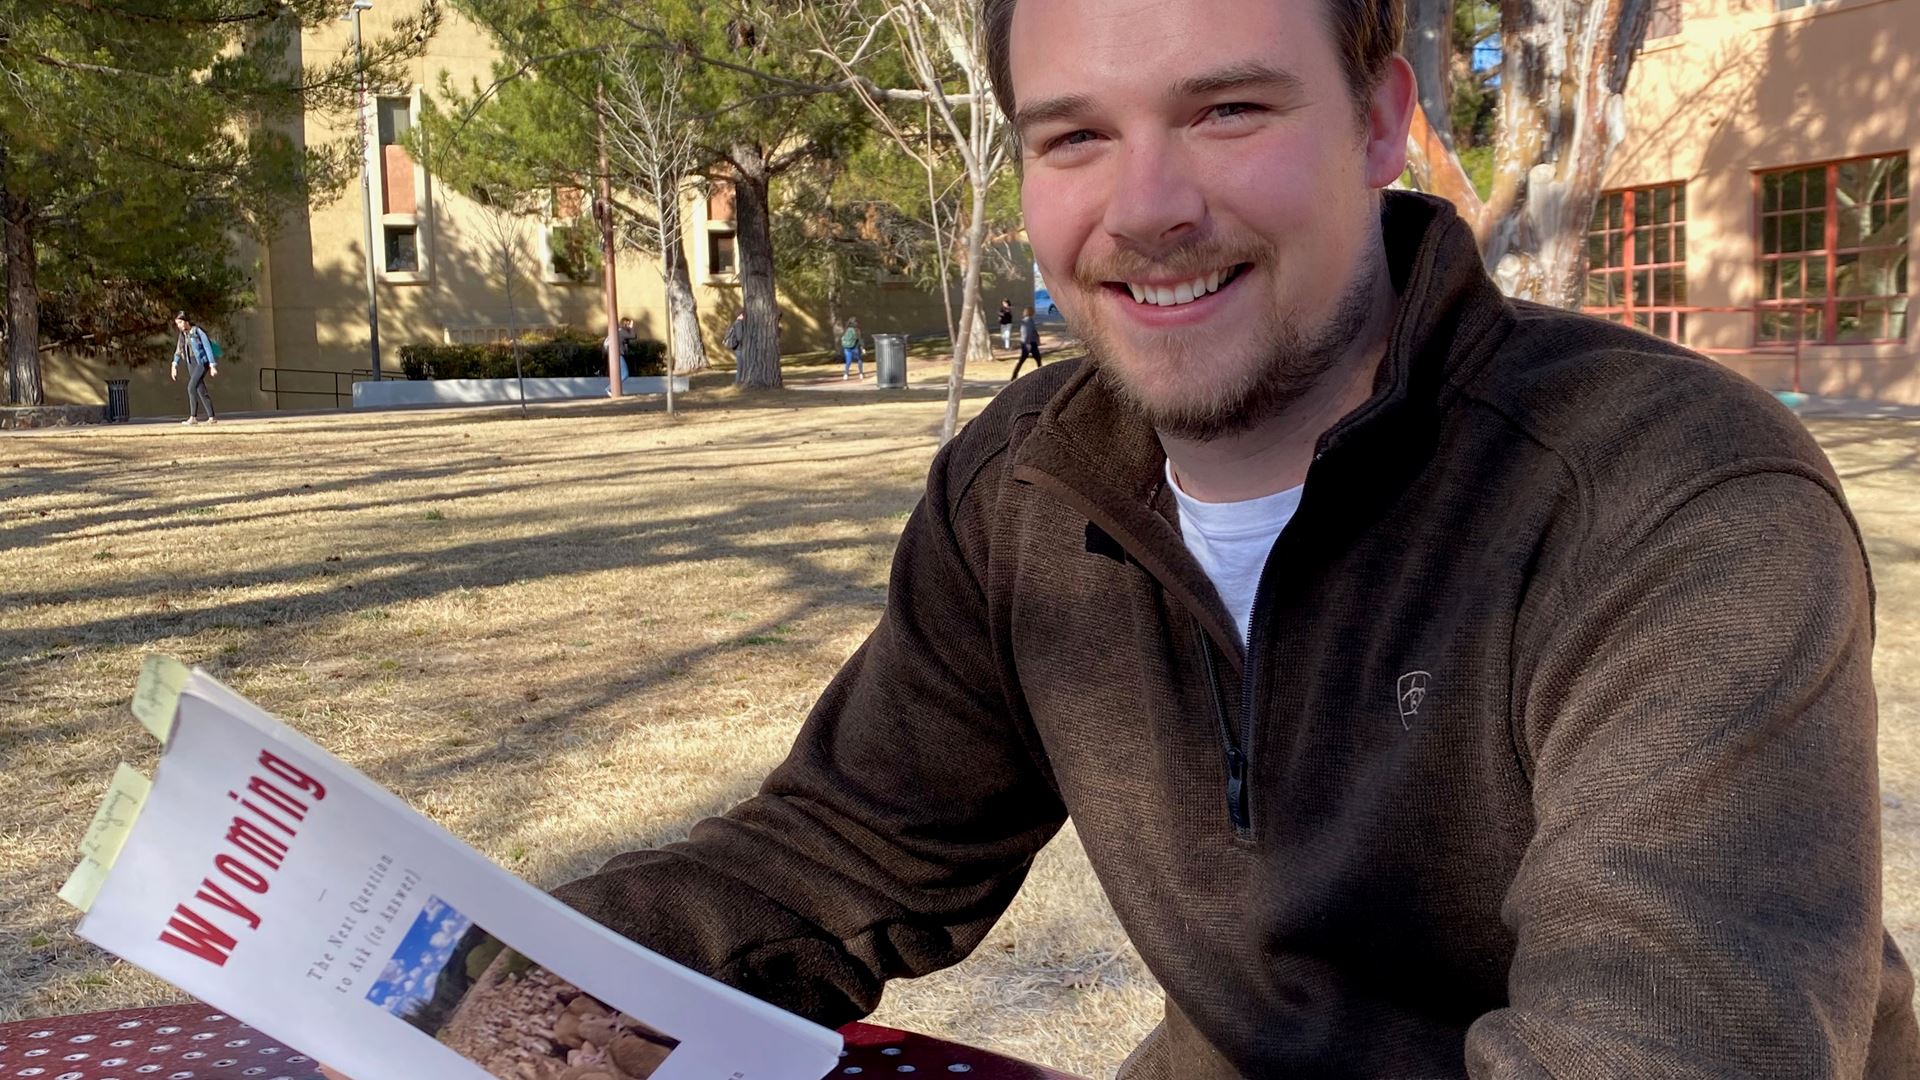 NMSU student’s book nominated for national recognition